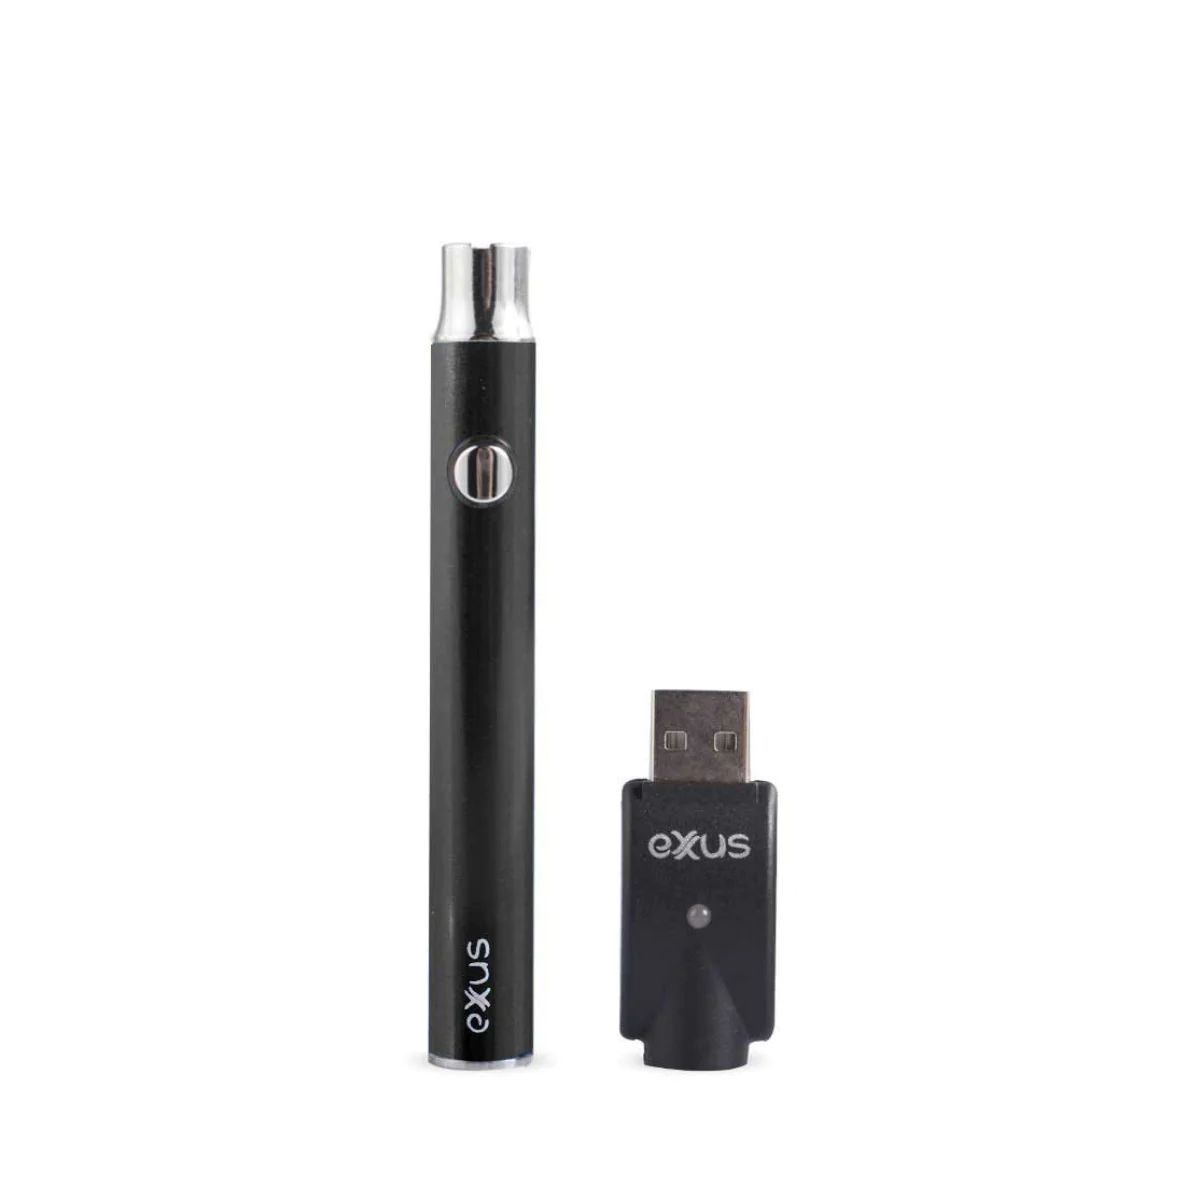 Cartridge Vaporizers By One Stoppipe Shop-The Ultimate Guide to Top Cartridge Vaporizers In-Depth Analysis and Reviews